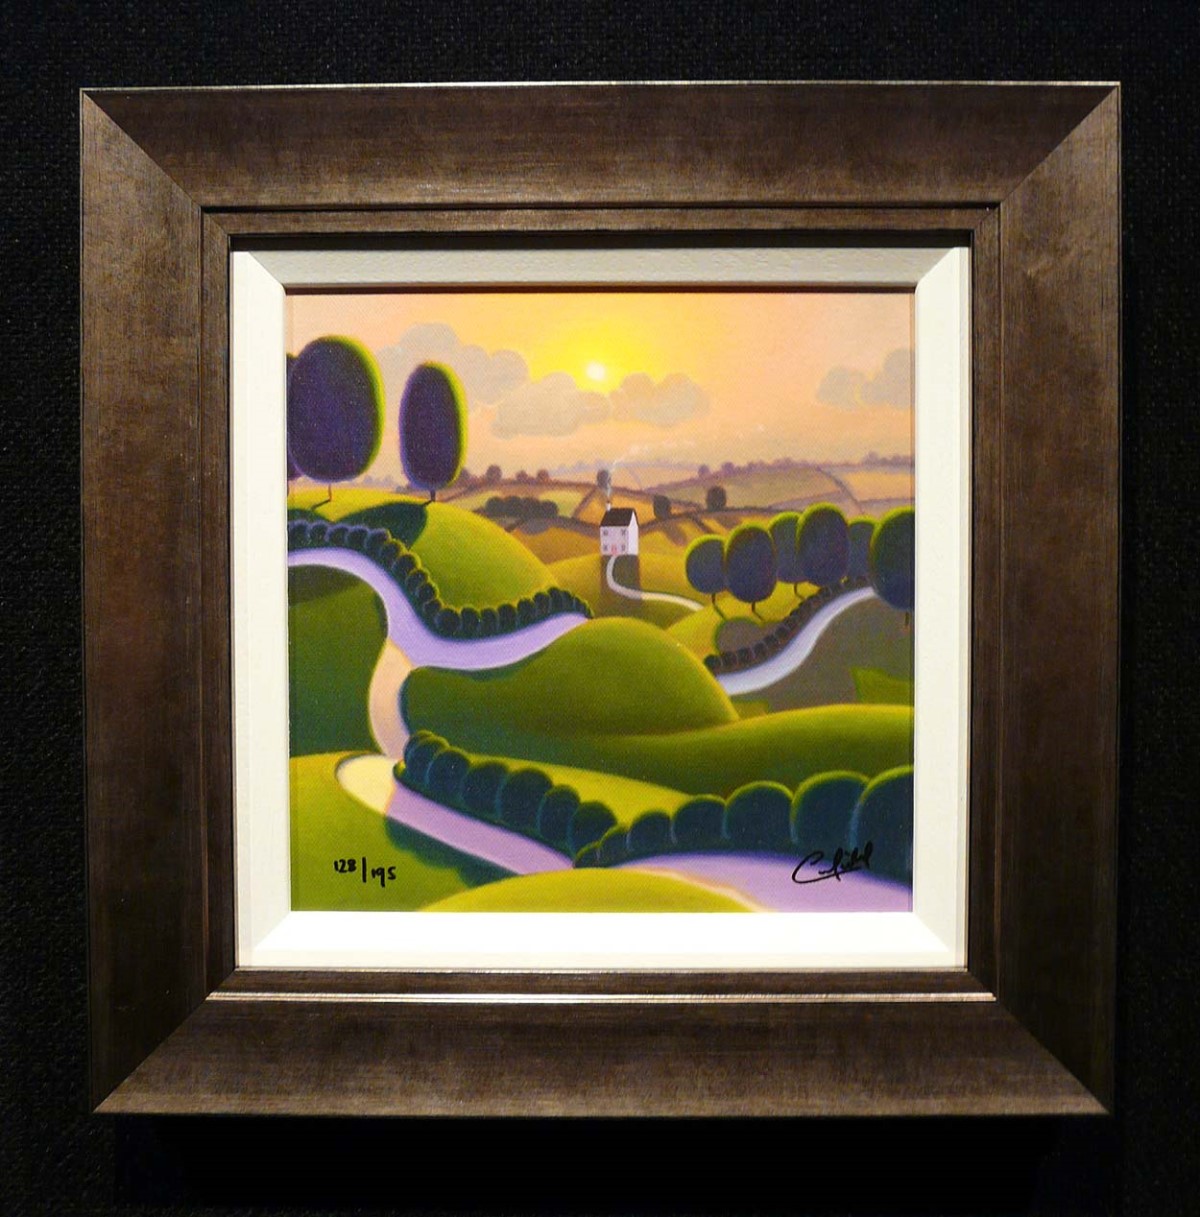 No Place like Home by Paul Corfield, Landscape | Rare